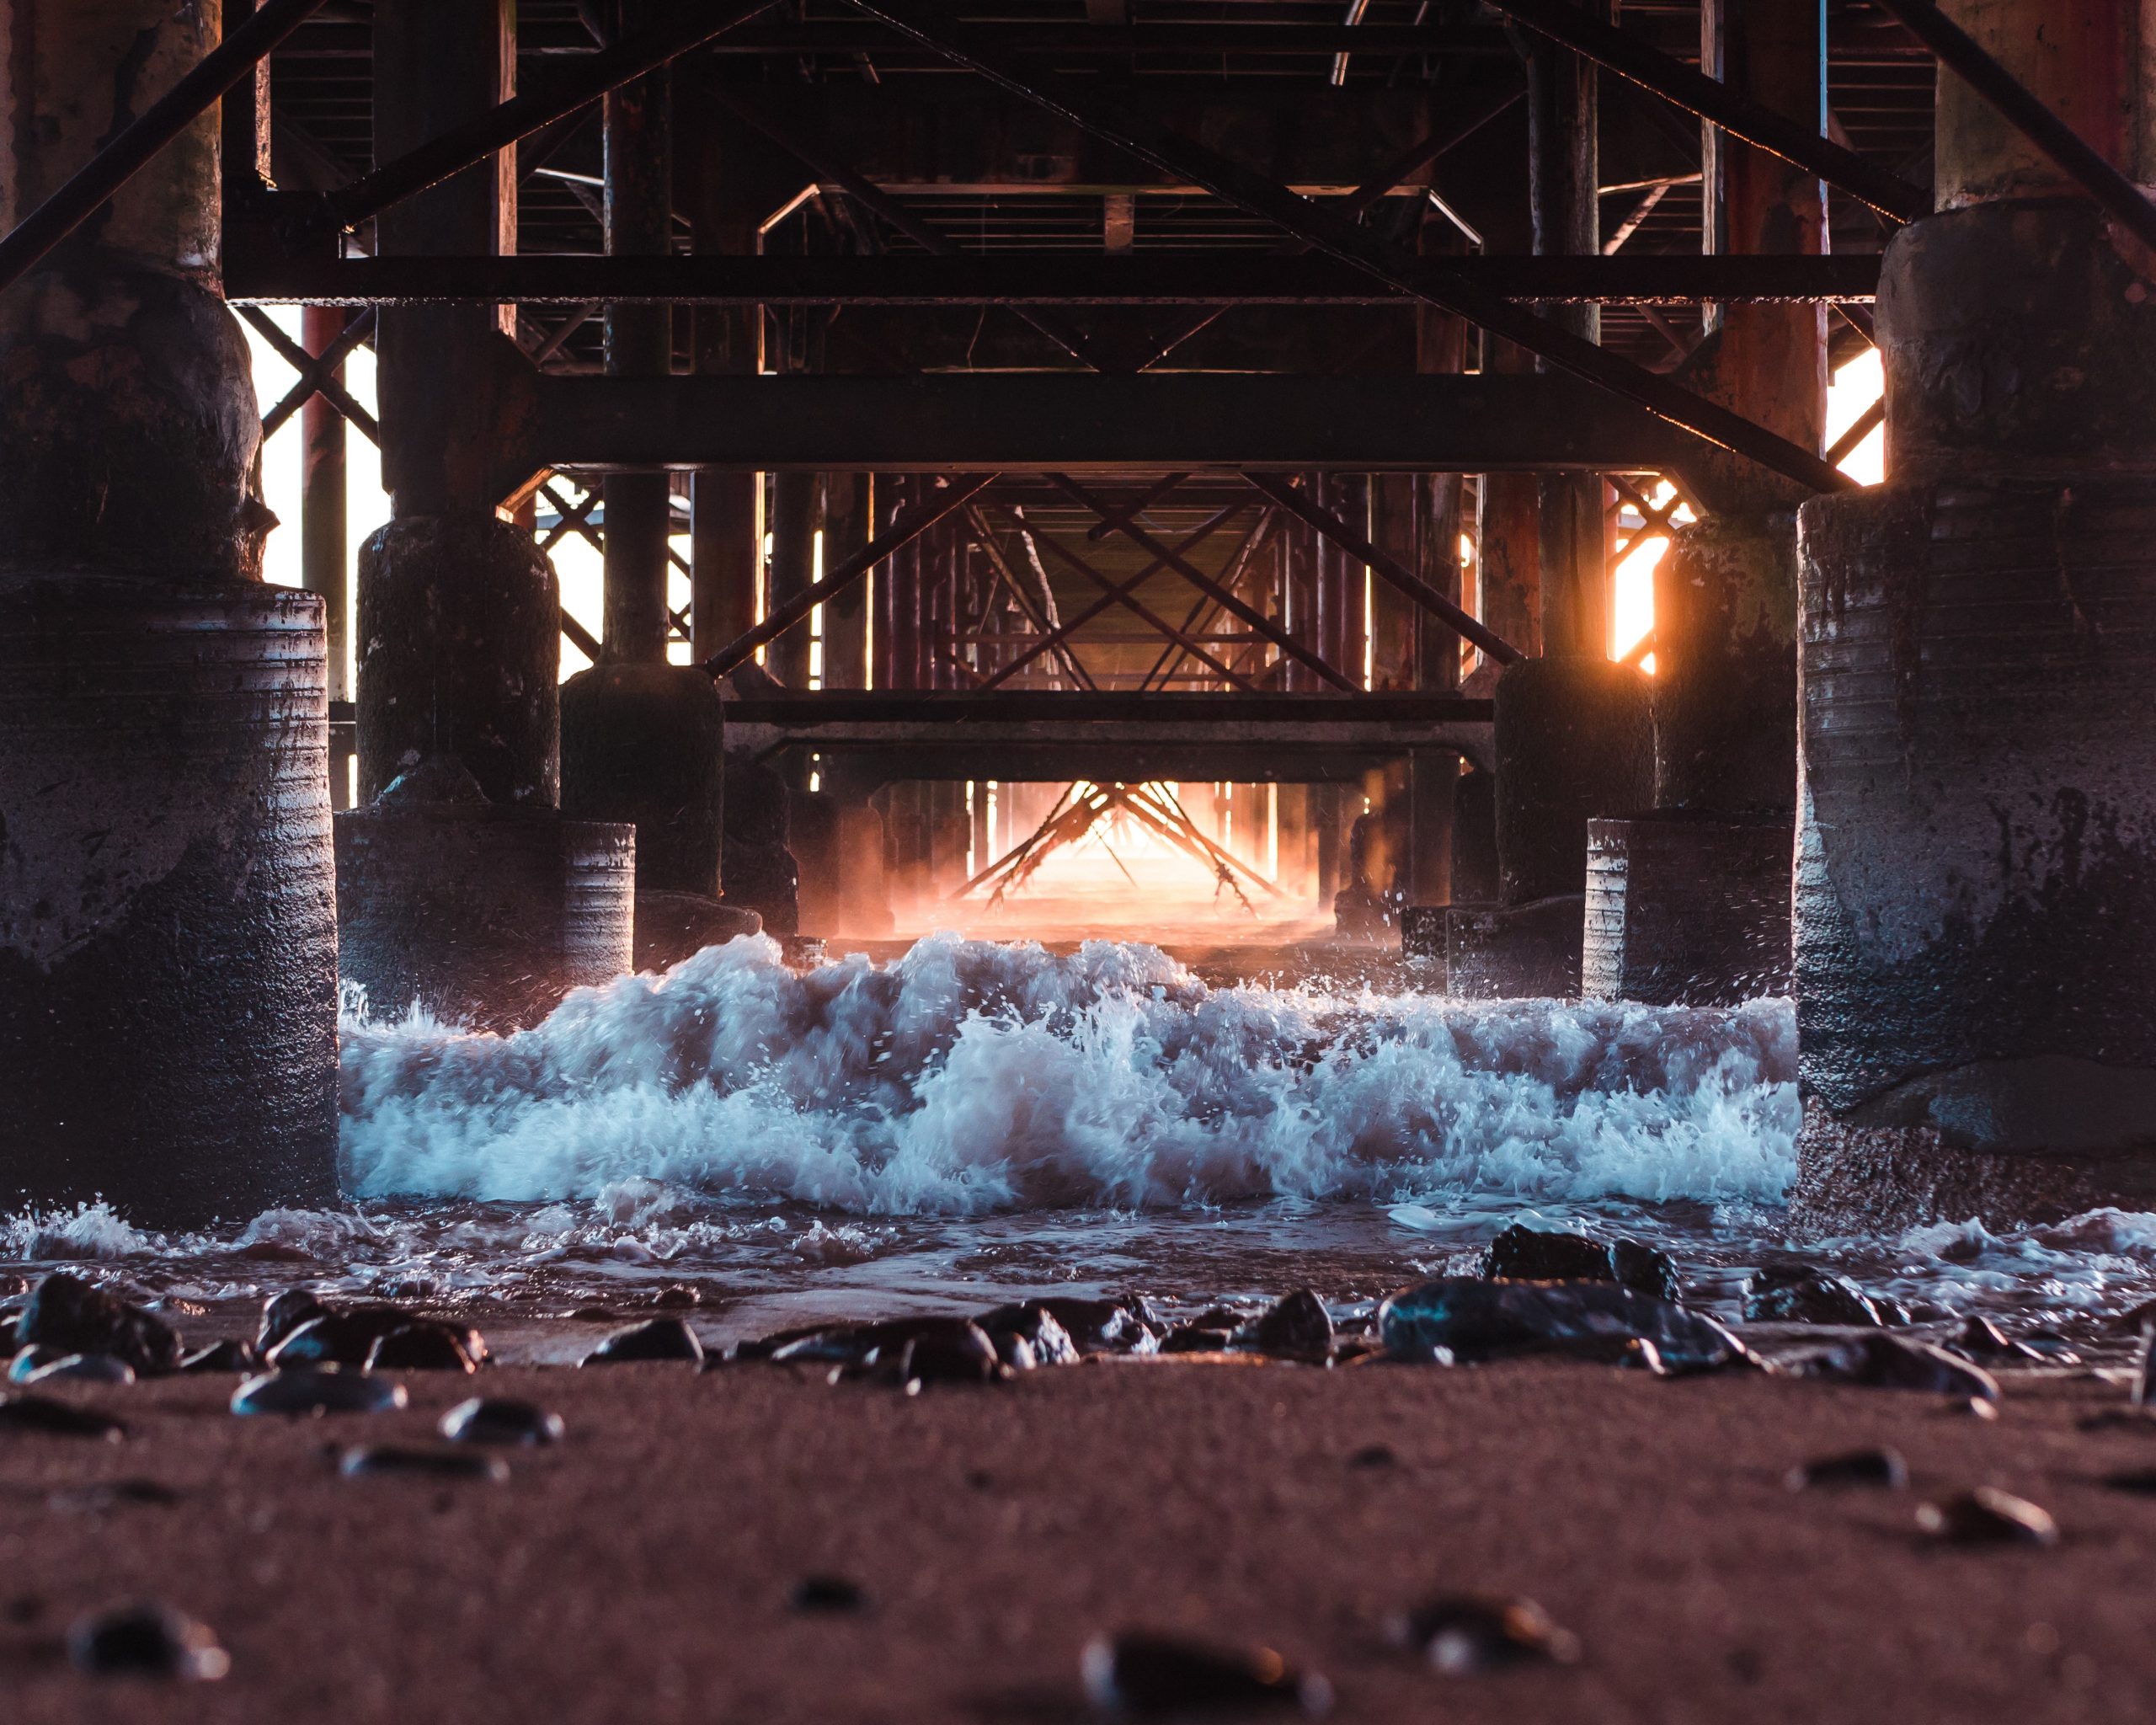 A photograph taken beneath a large boardwalk. Part of a sandy beach with black stones, and an incoming crashing wave is depicted in the front part of the photo. In the distance, the rising sun shines through the gaps in the boardwalk.